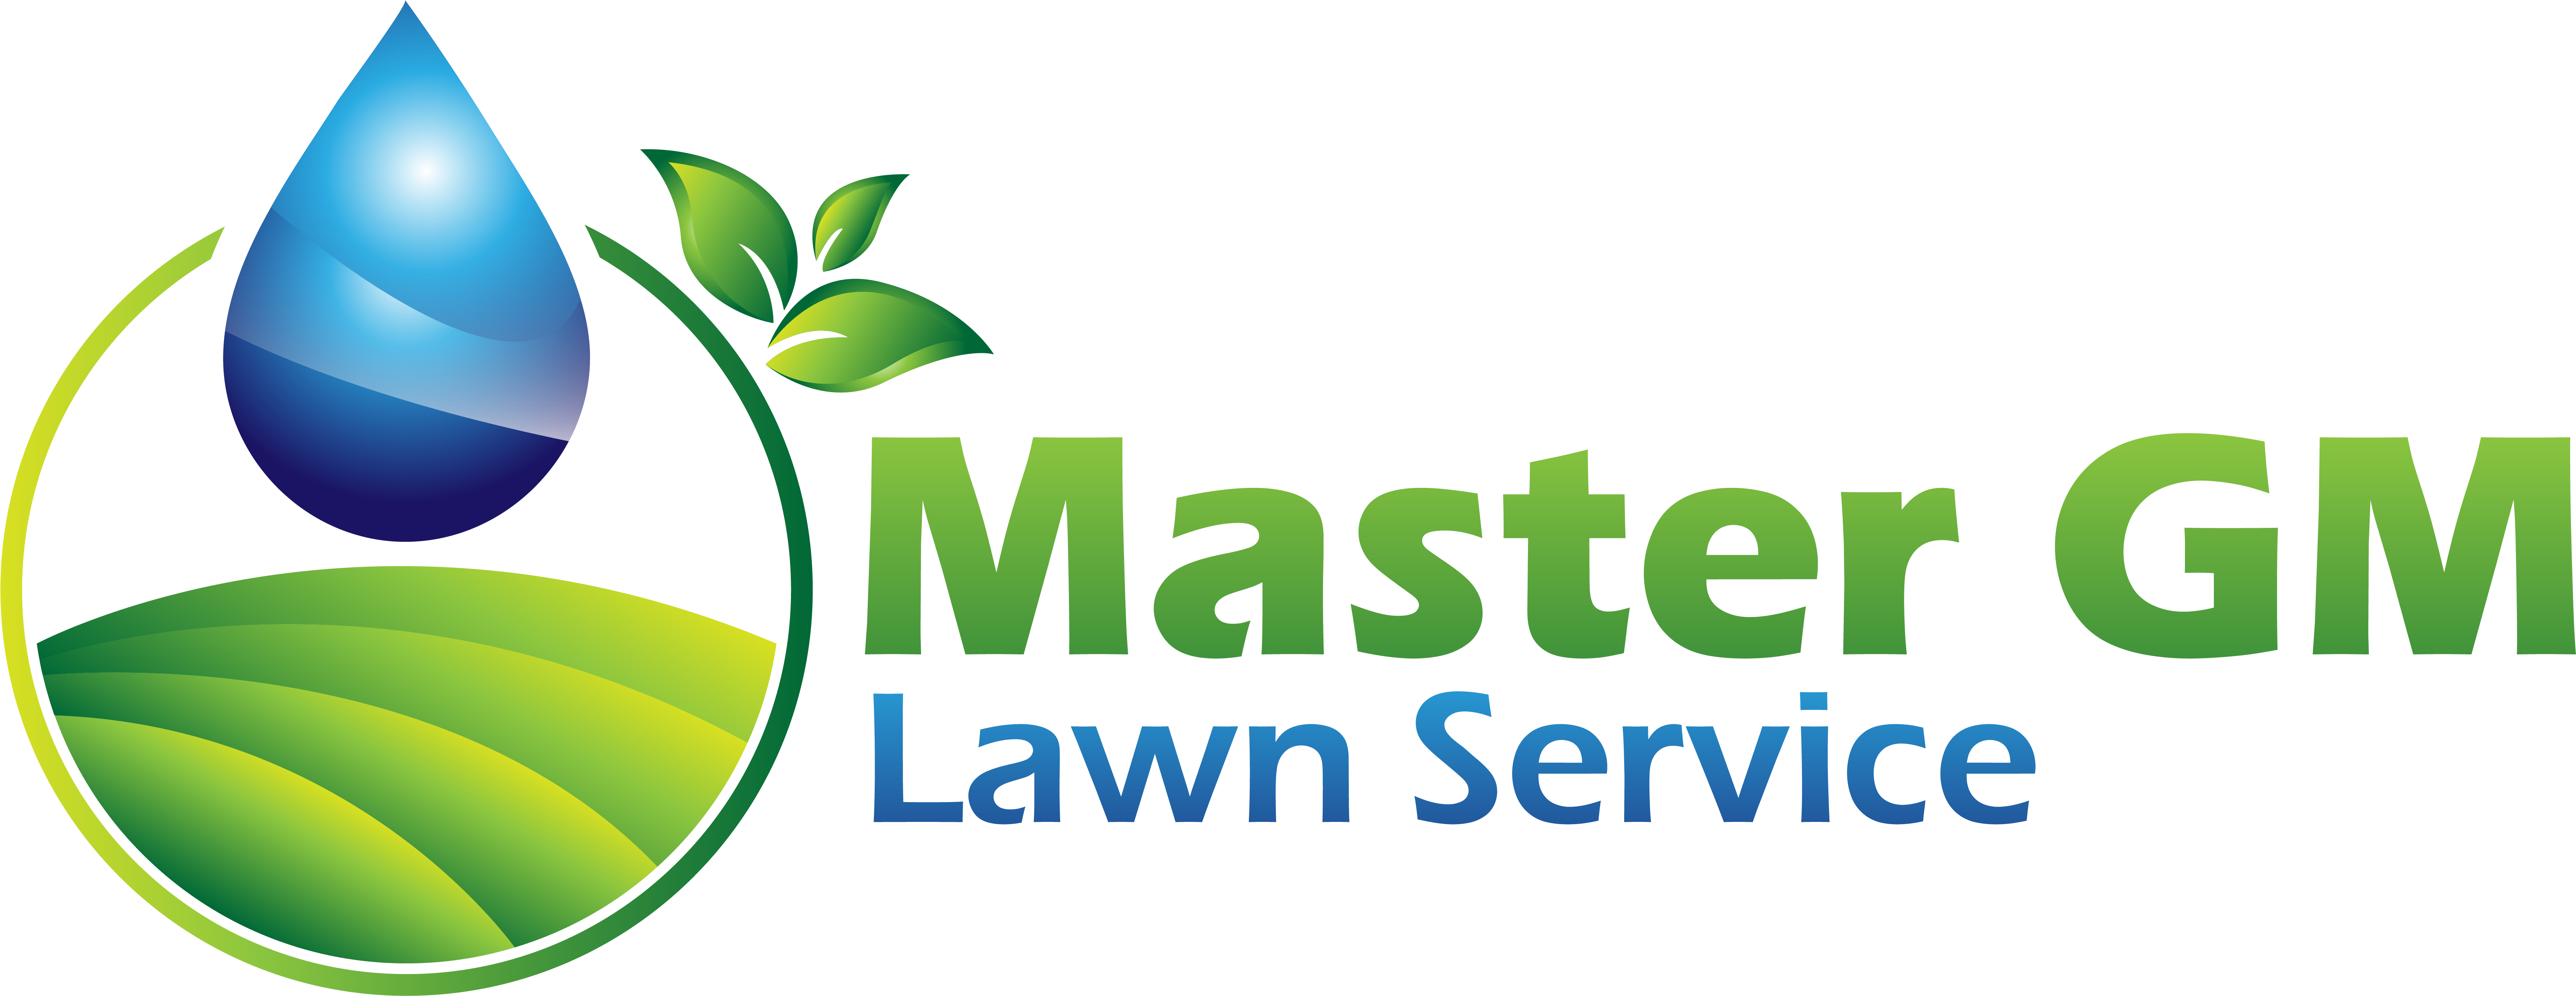 Master Gm Lawn Service - Faster Than A Bullet (7253x2803)